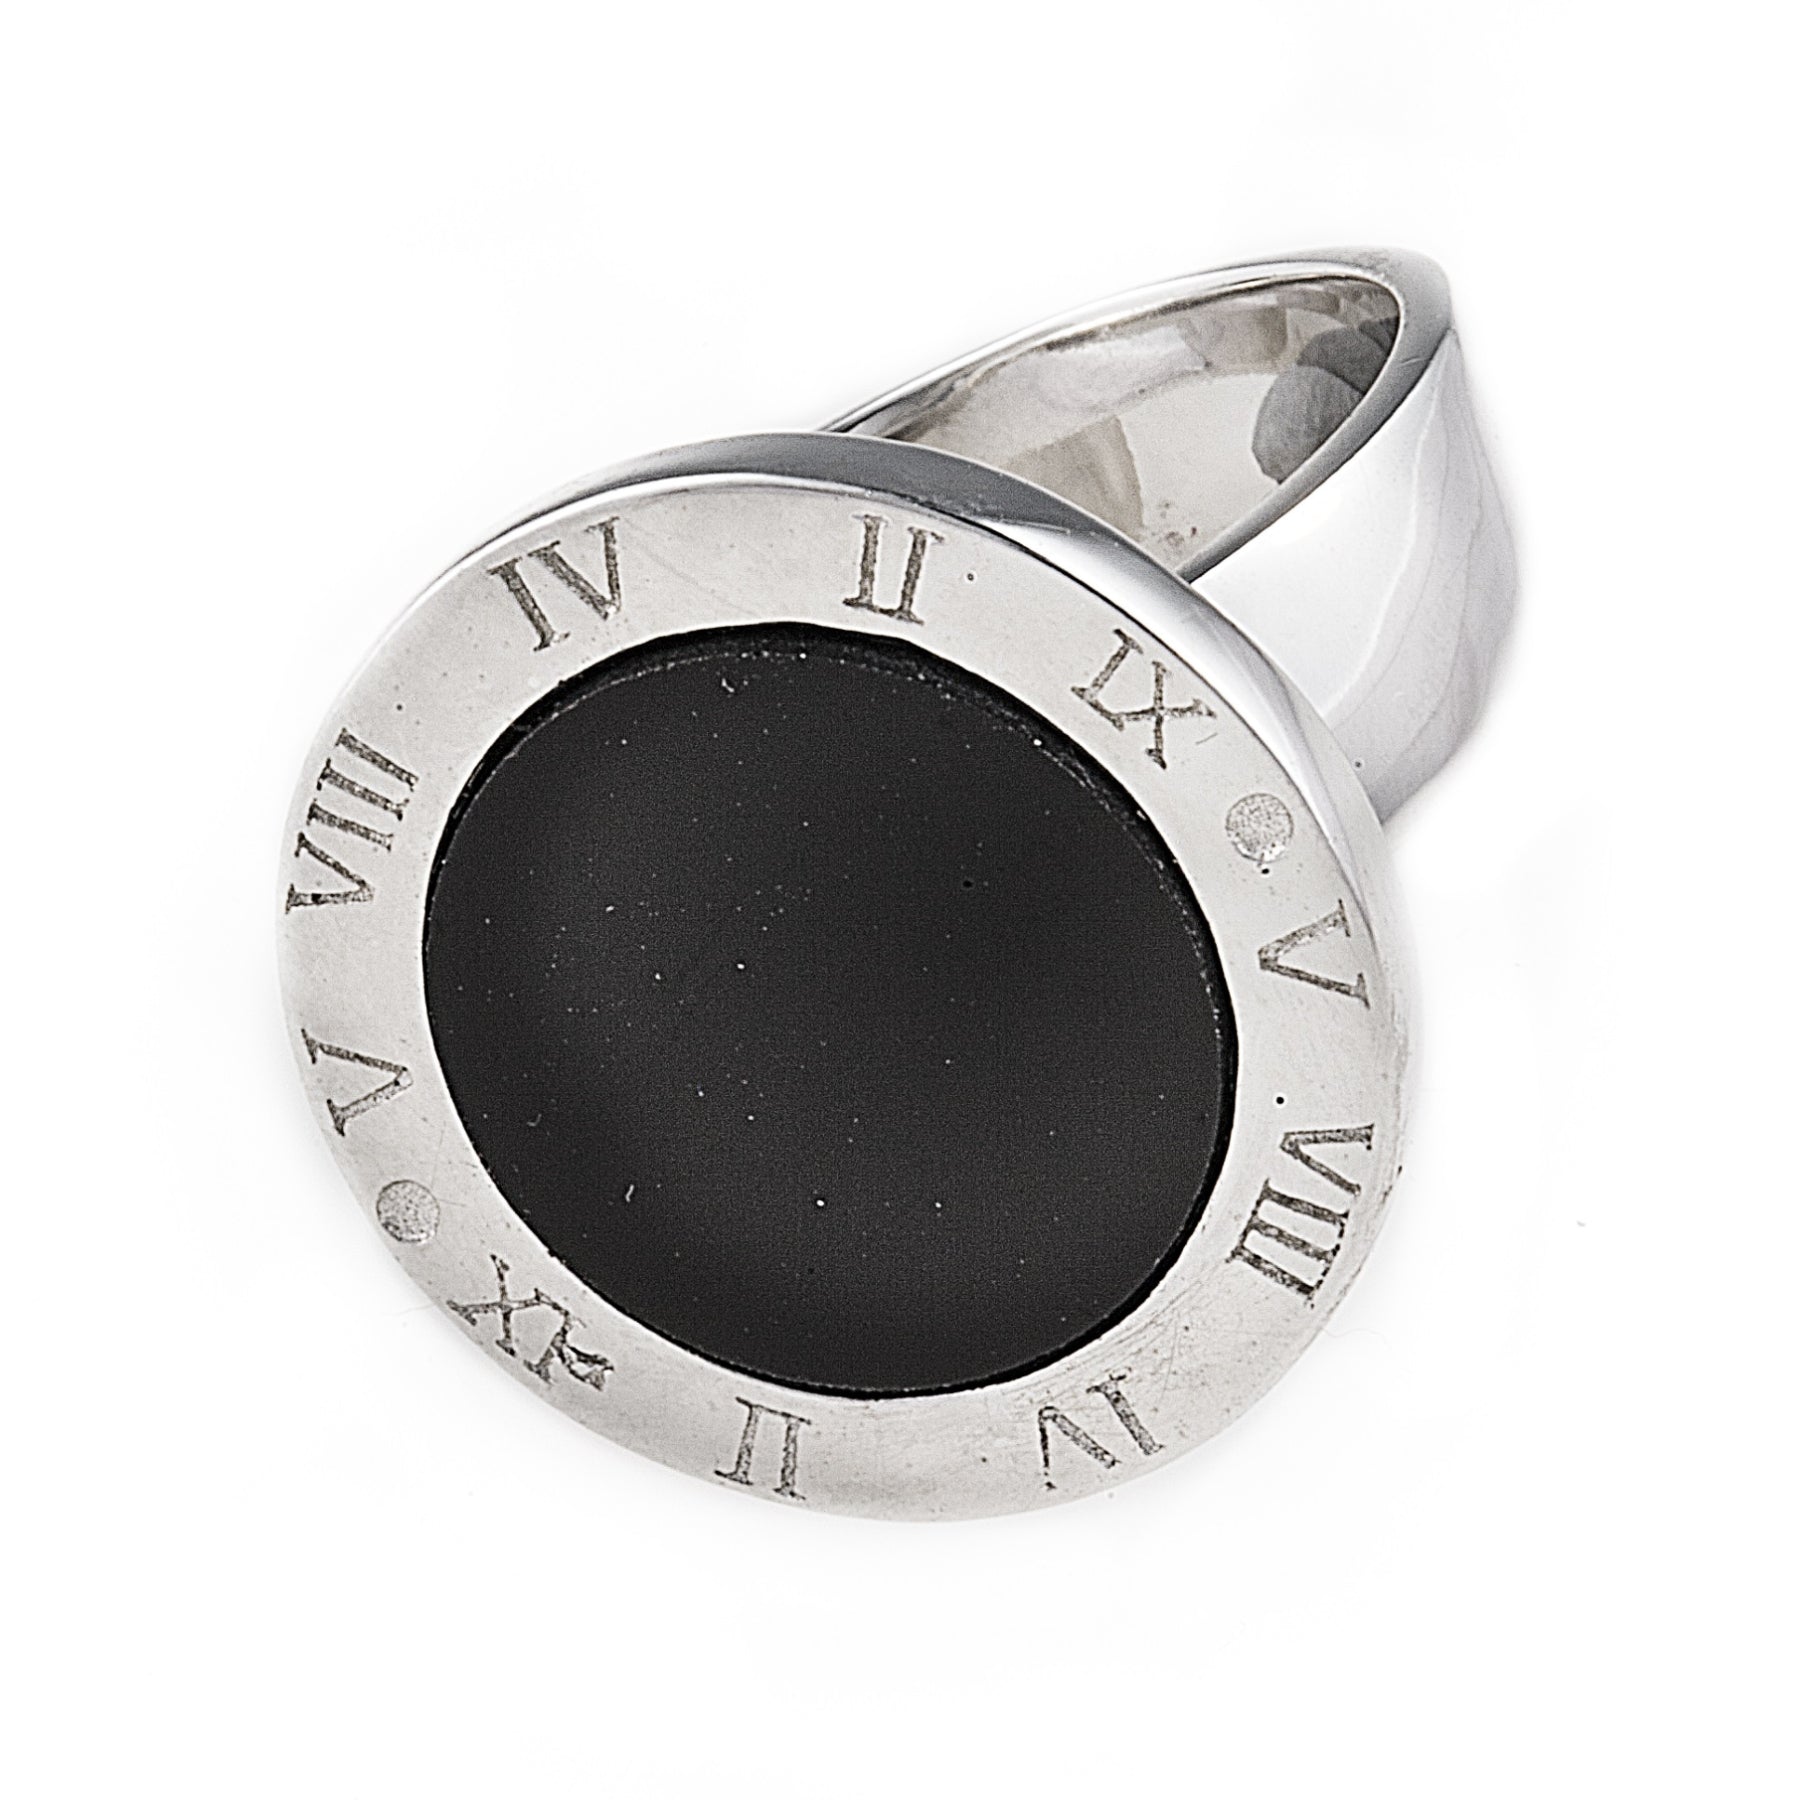 The modern Onyx World Ring is made of 925 sterling silver and features a polished black onyx centrepiece surrounded by our signature Roman Numerals. Shop rings & affordable luxury jewellery by Bellagio & Co. Worldwide shipping